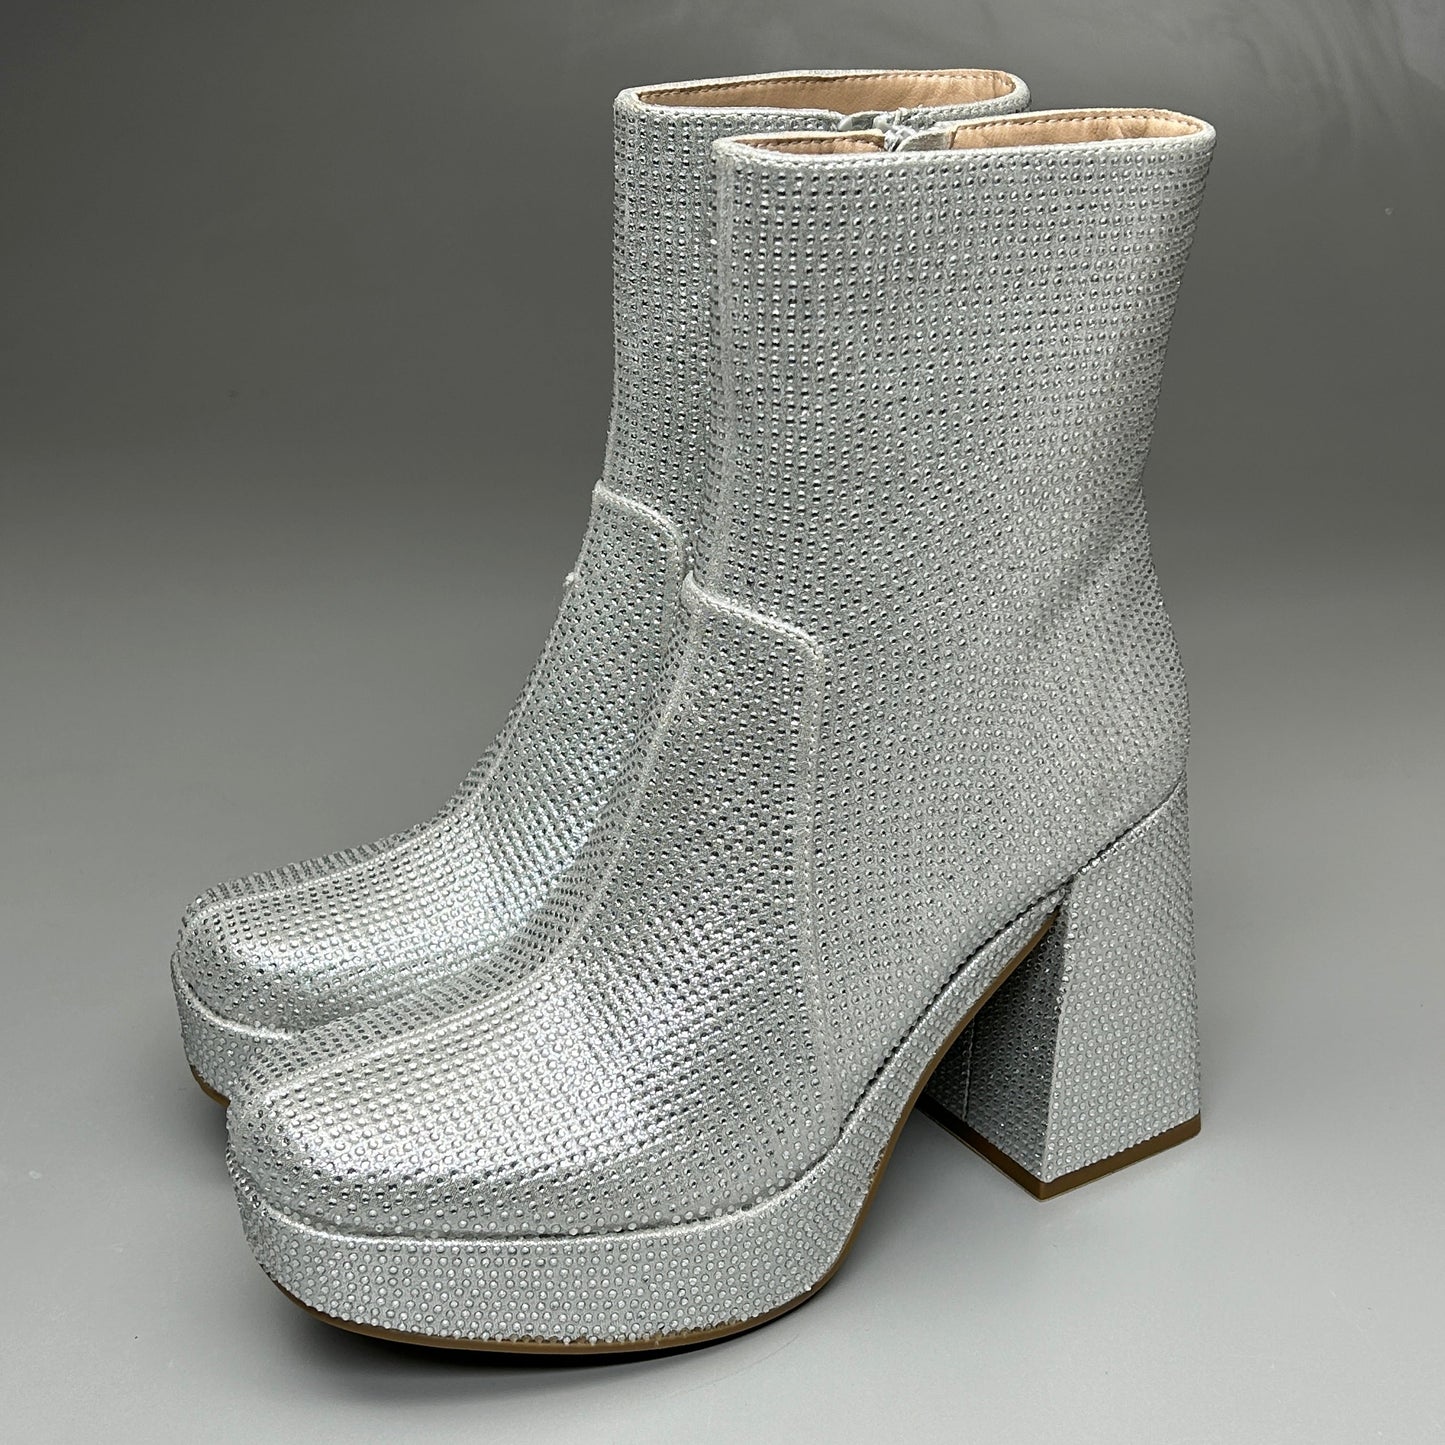 MIA Iva Silver Stone Heeled Boots Women's Sz 11 Silver GS1253108 (New)